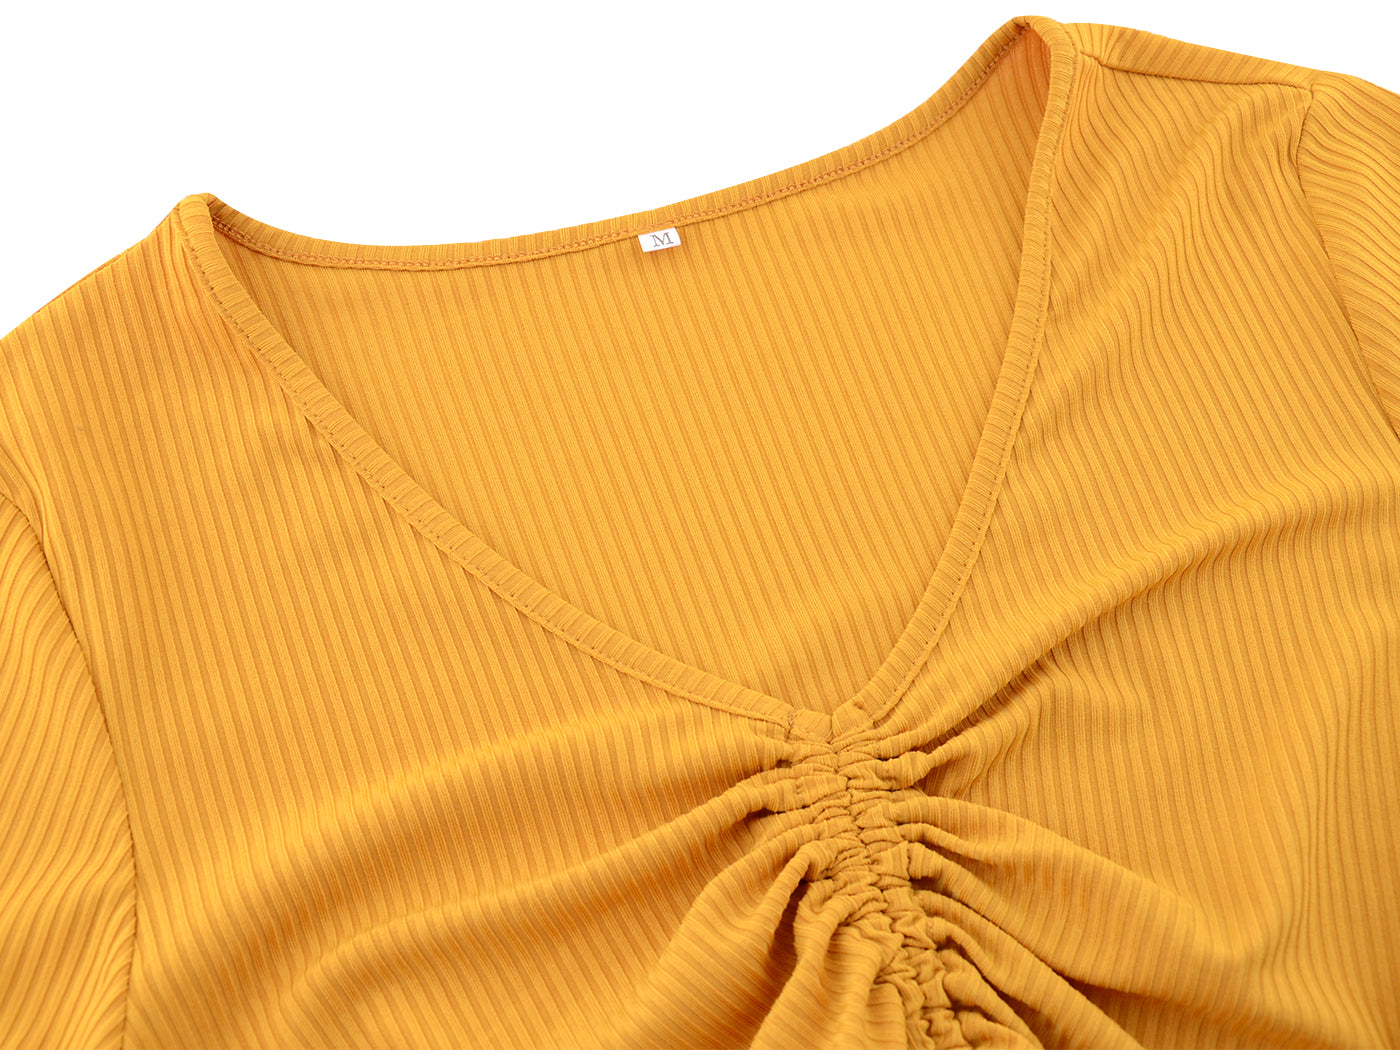 Casual Long Sleeve V Neck Ribbed Ruched Front Tie Crop Top Blouse